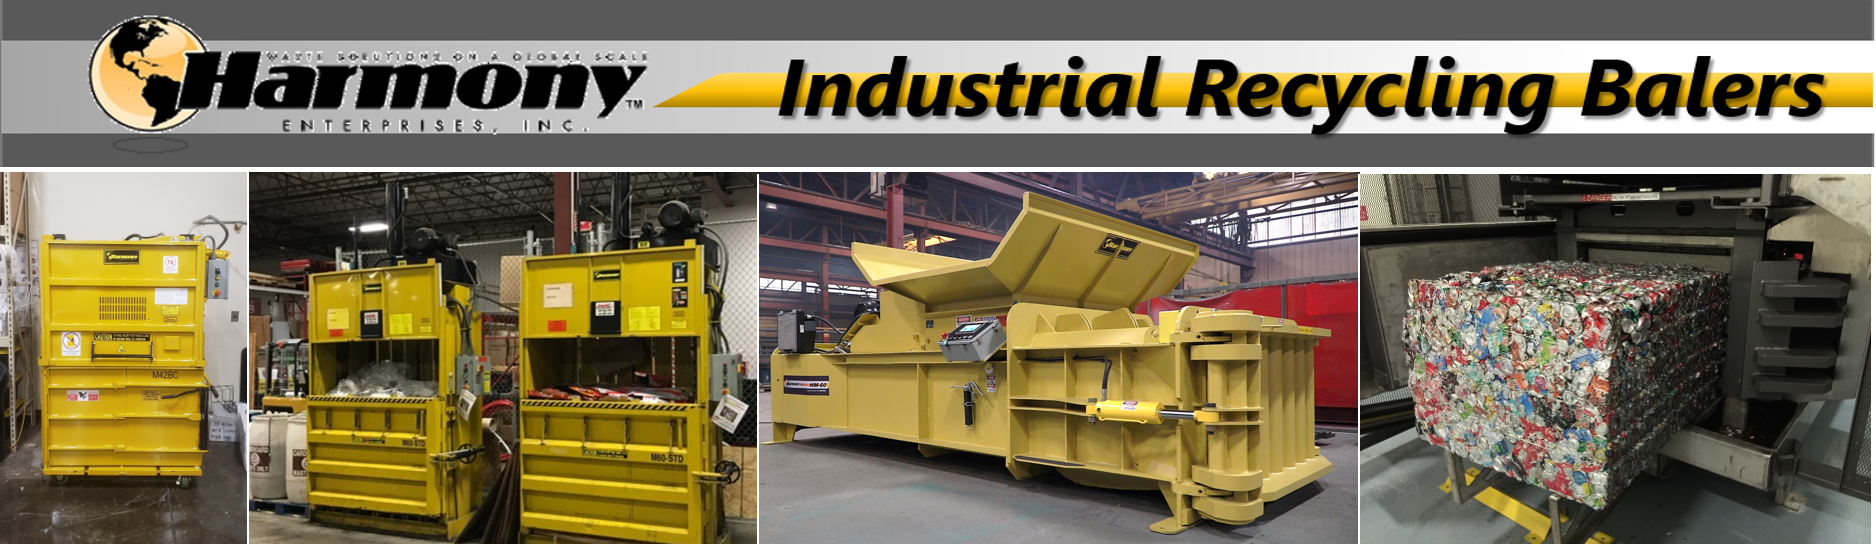 Industrial Recycling Balers